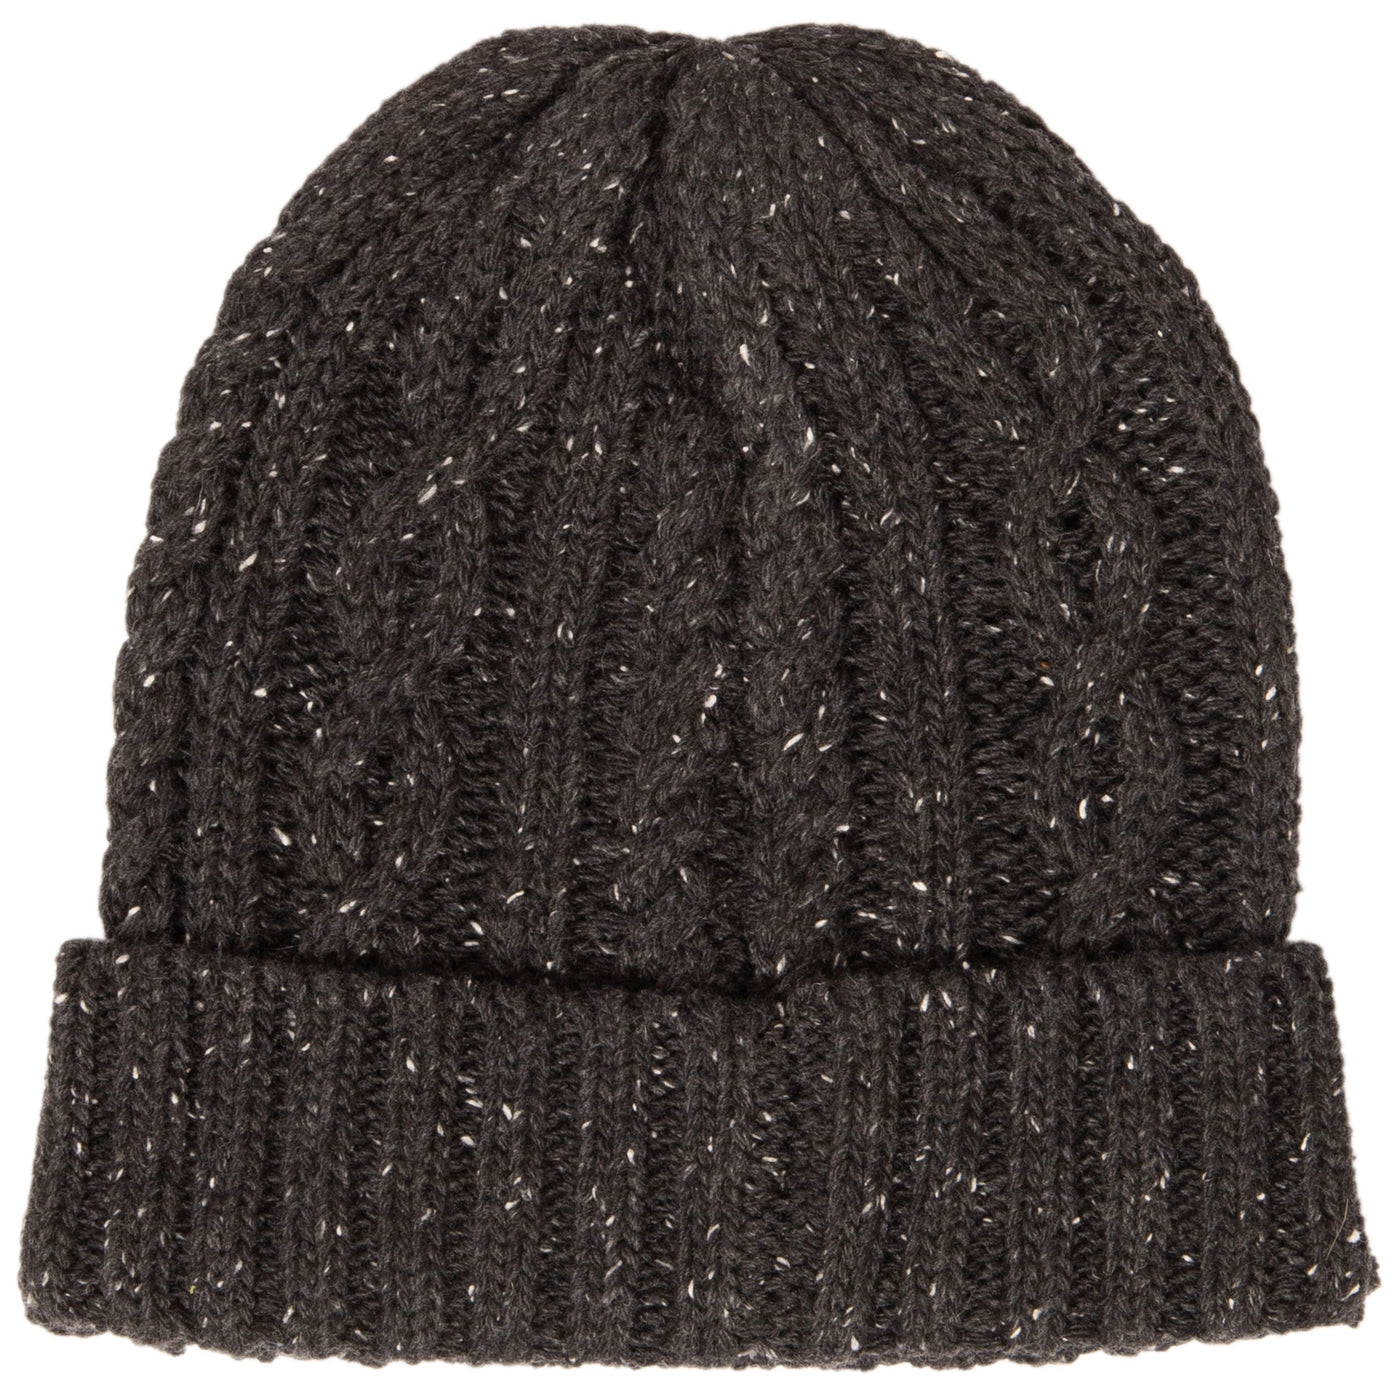 Beanie Company Knit Hat Cable Wool Cuffed Men\'s Blend Diego San –